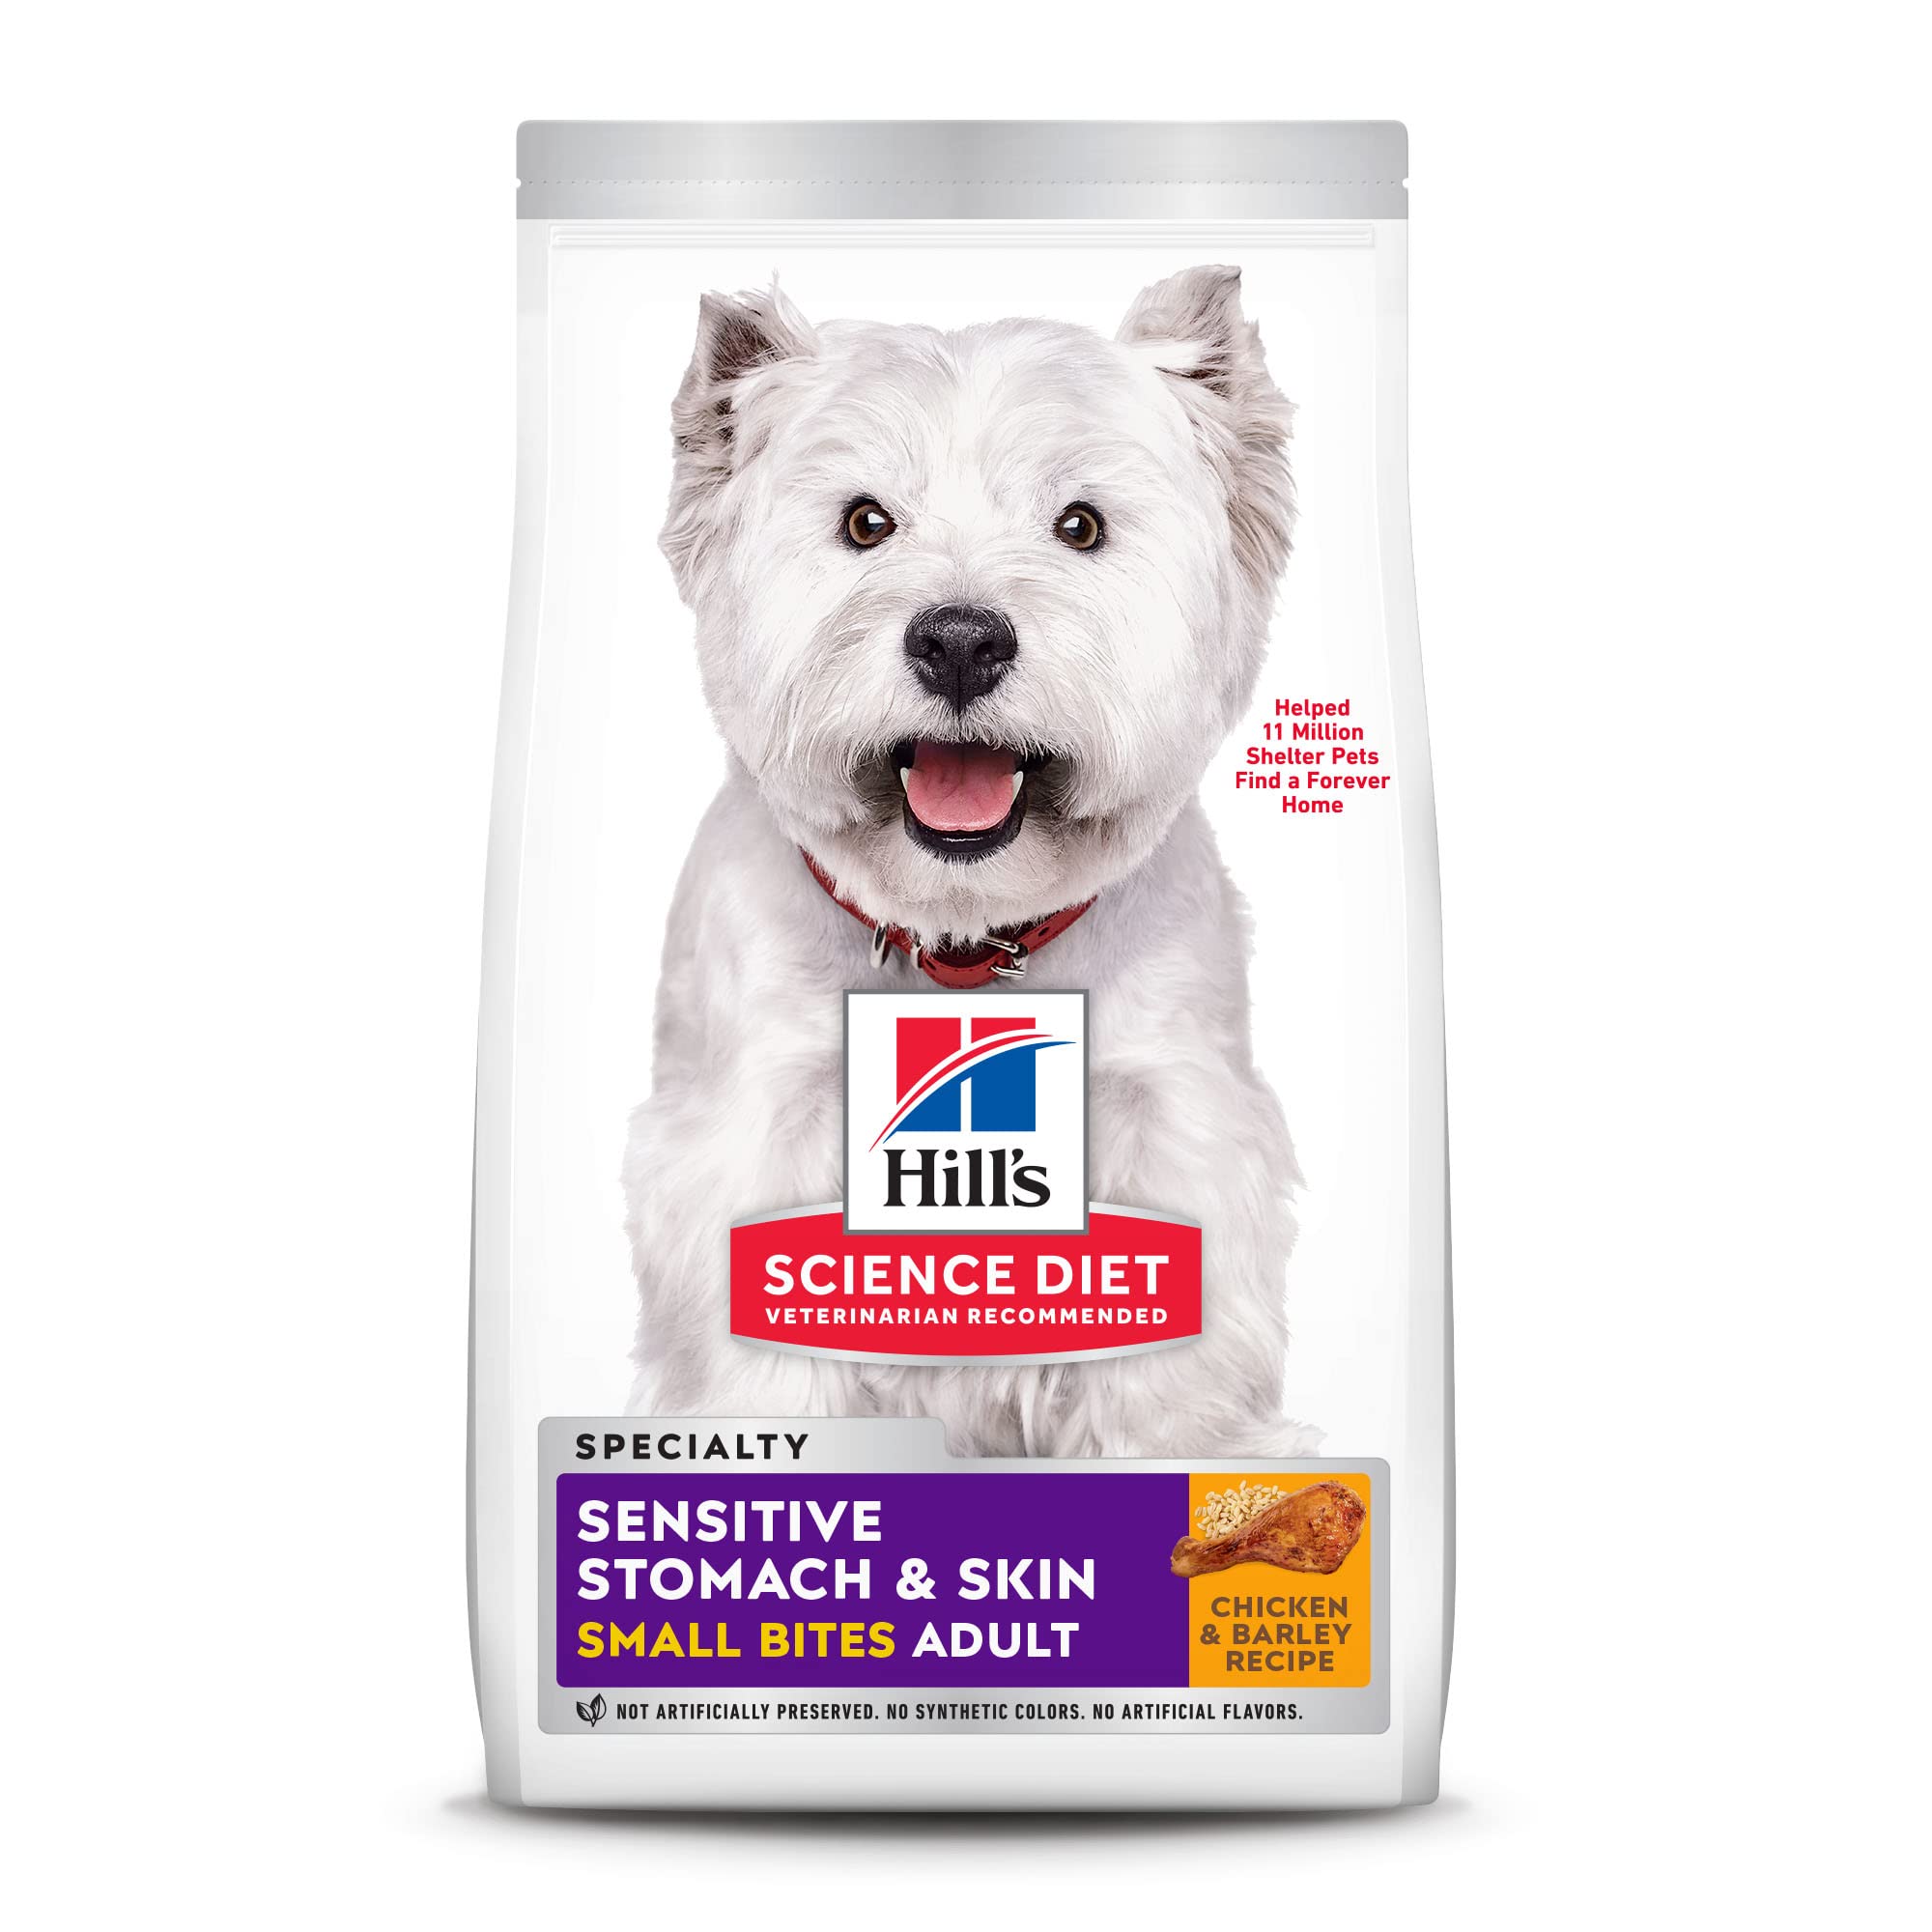 Hill's Science Diet Adult Sensitive Stomach and Skin, Small Bites Dry Dog Food